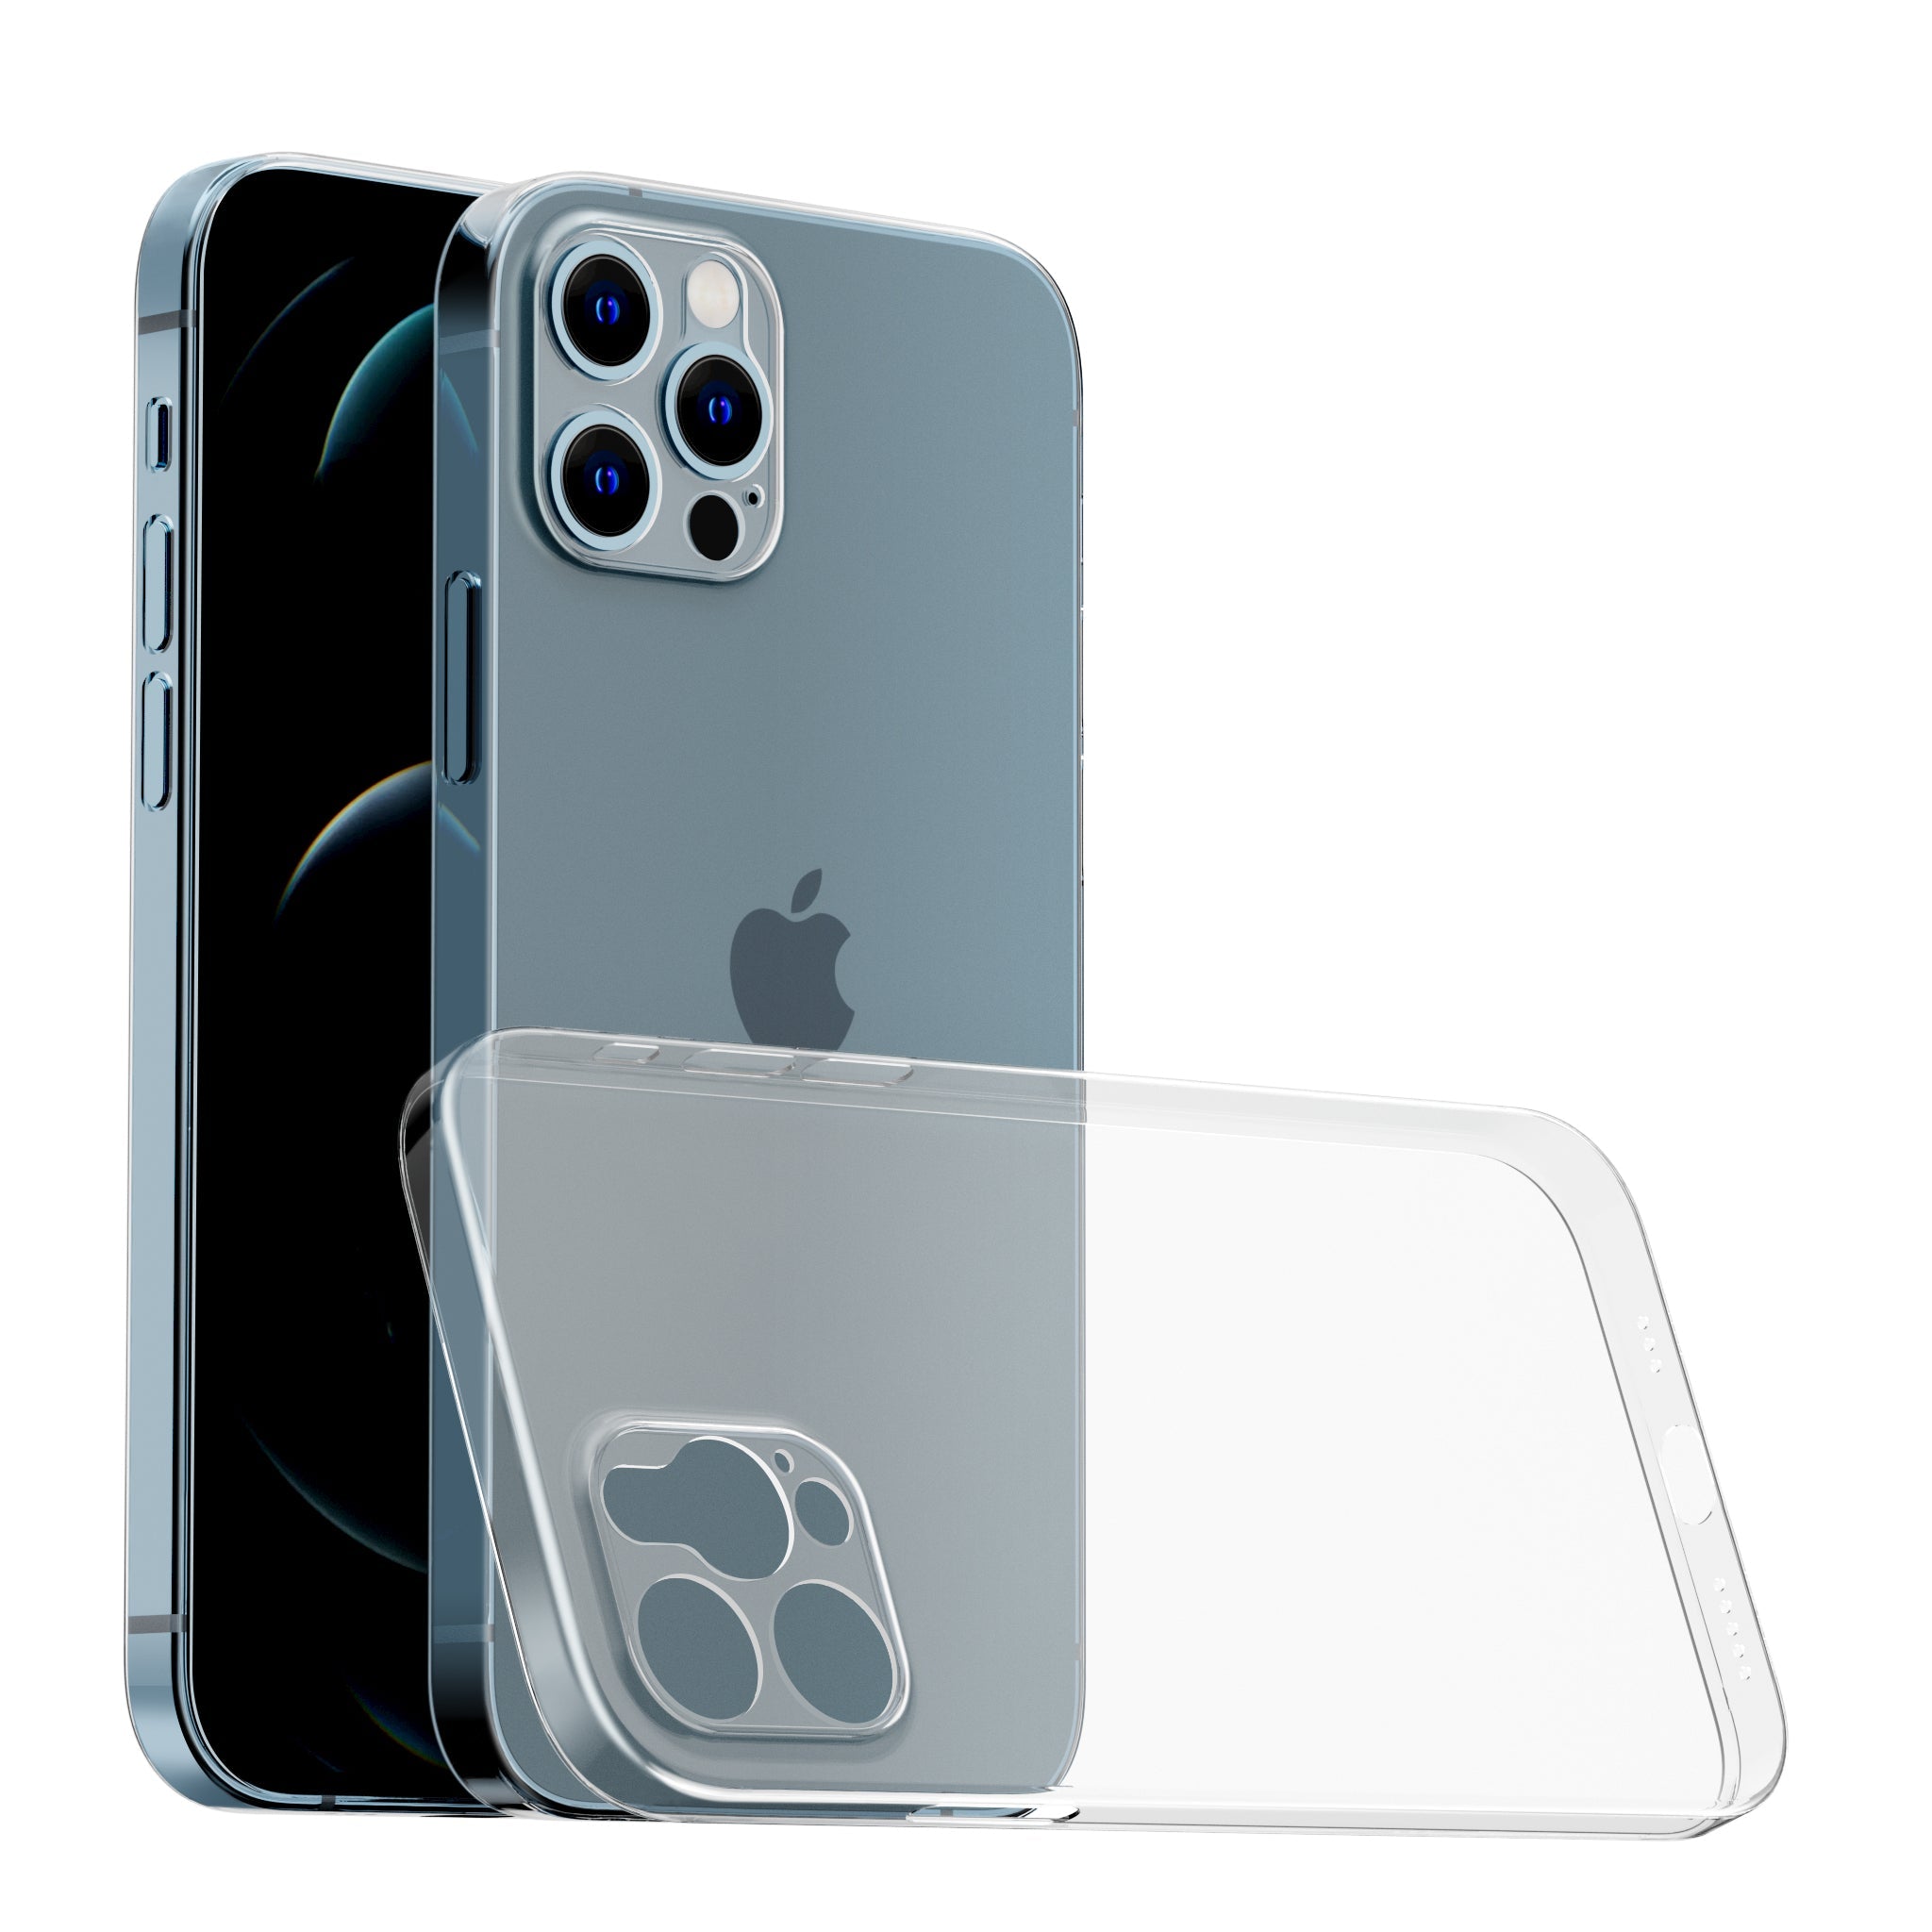 Slimcase Mobile Back Cover for iPhone 12 Pro